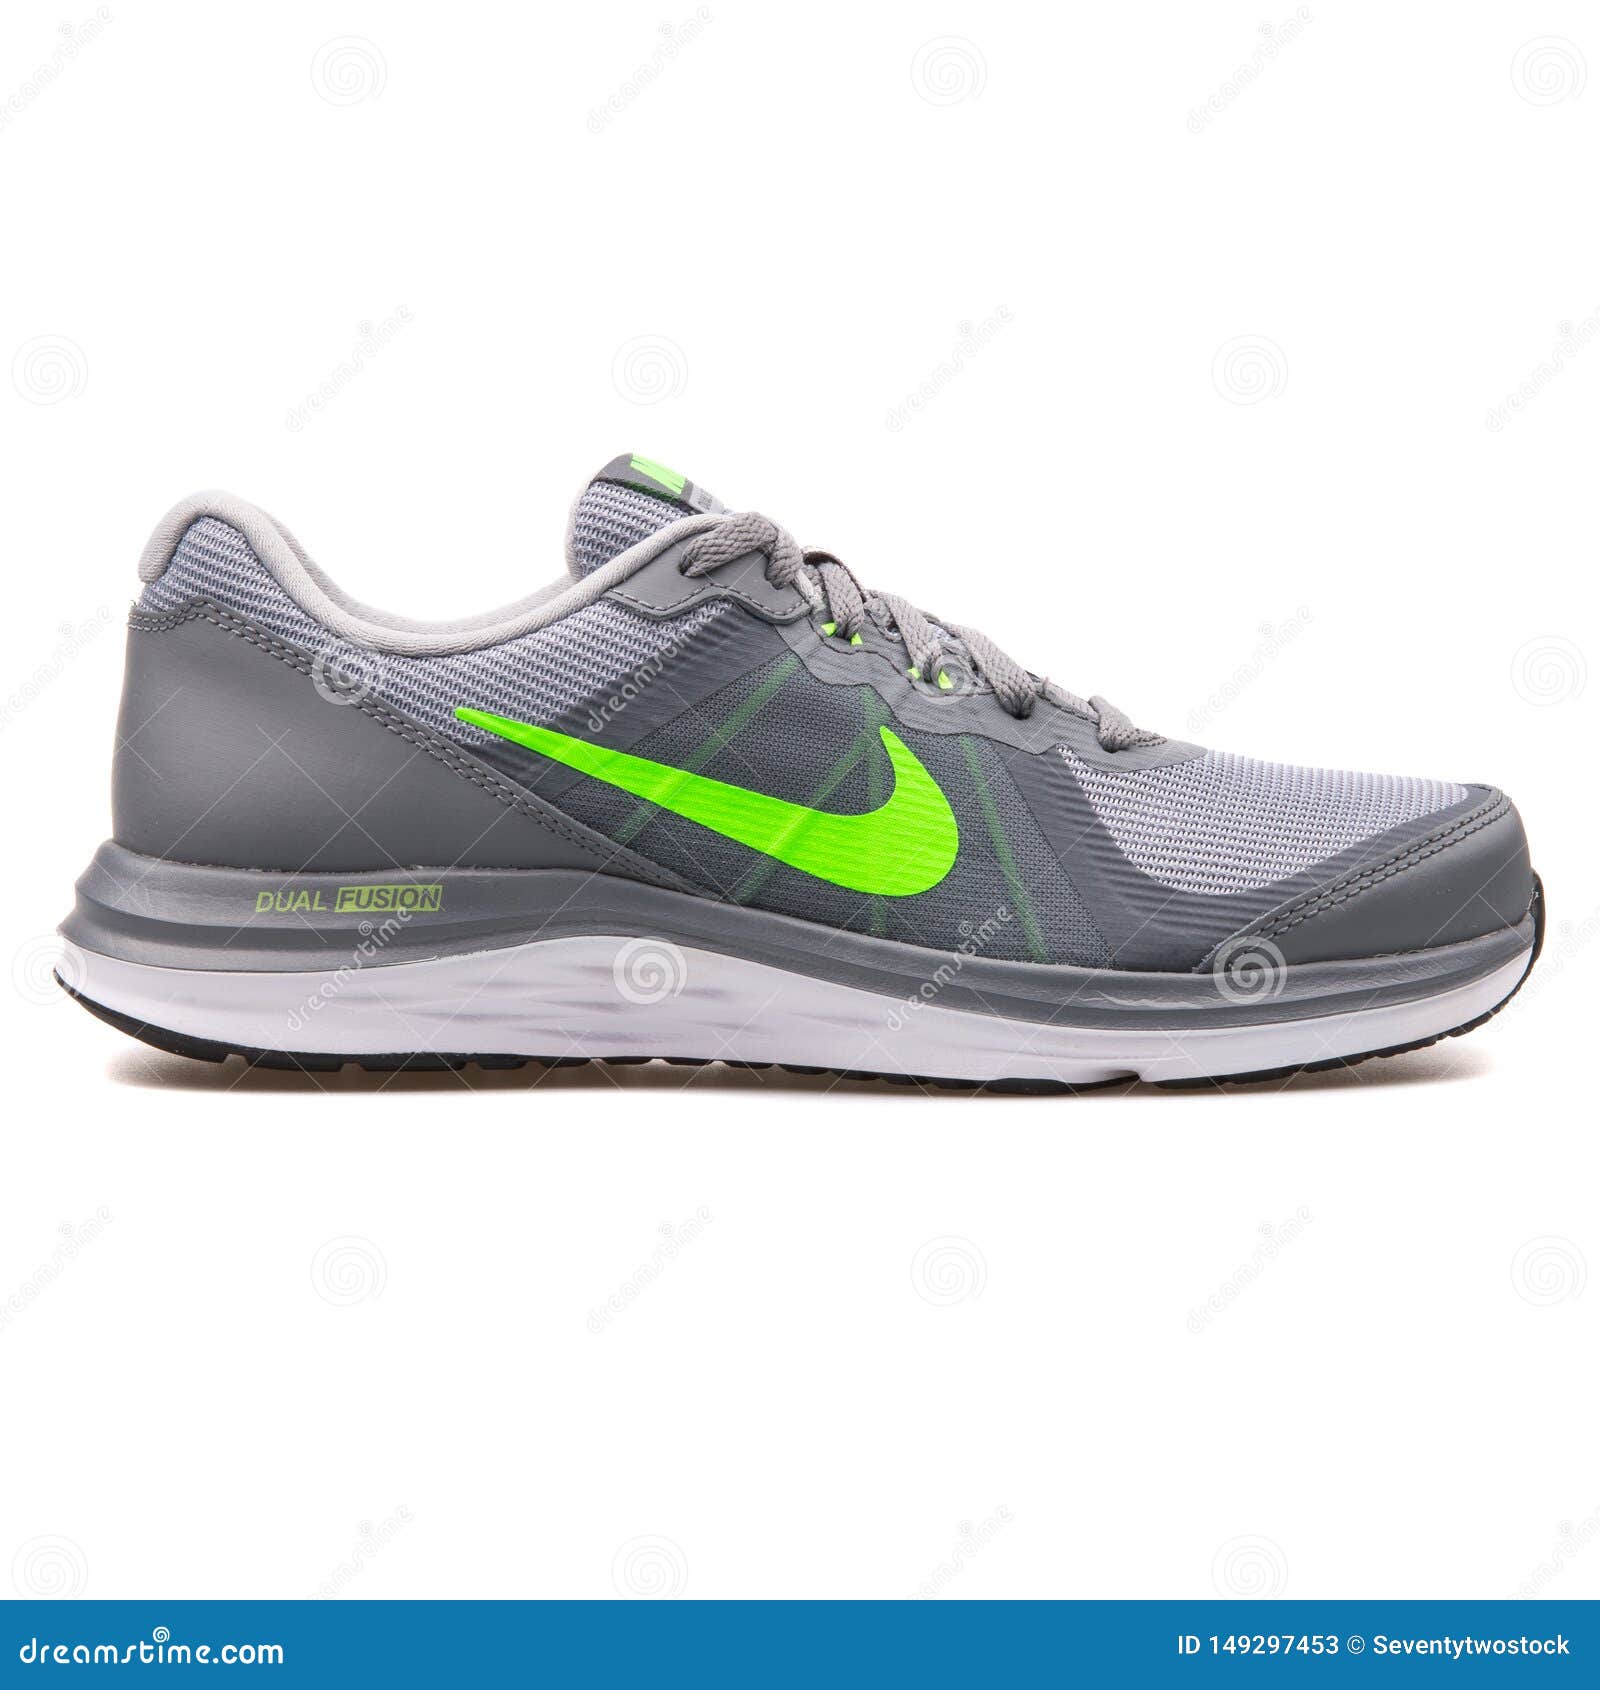 Nike Dual Fusion X Grey and Green Sneaker Editorial Stock Photo Image of footwear: 149297453